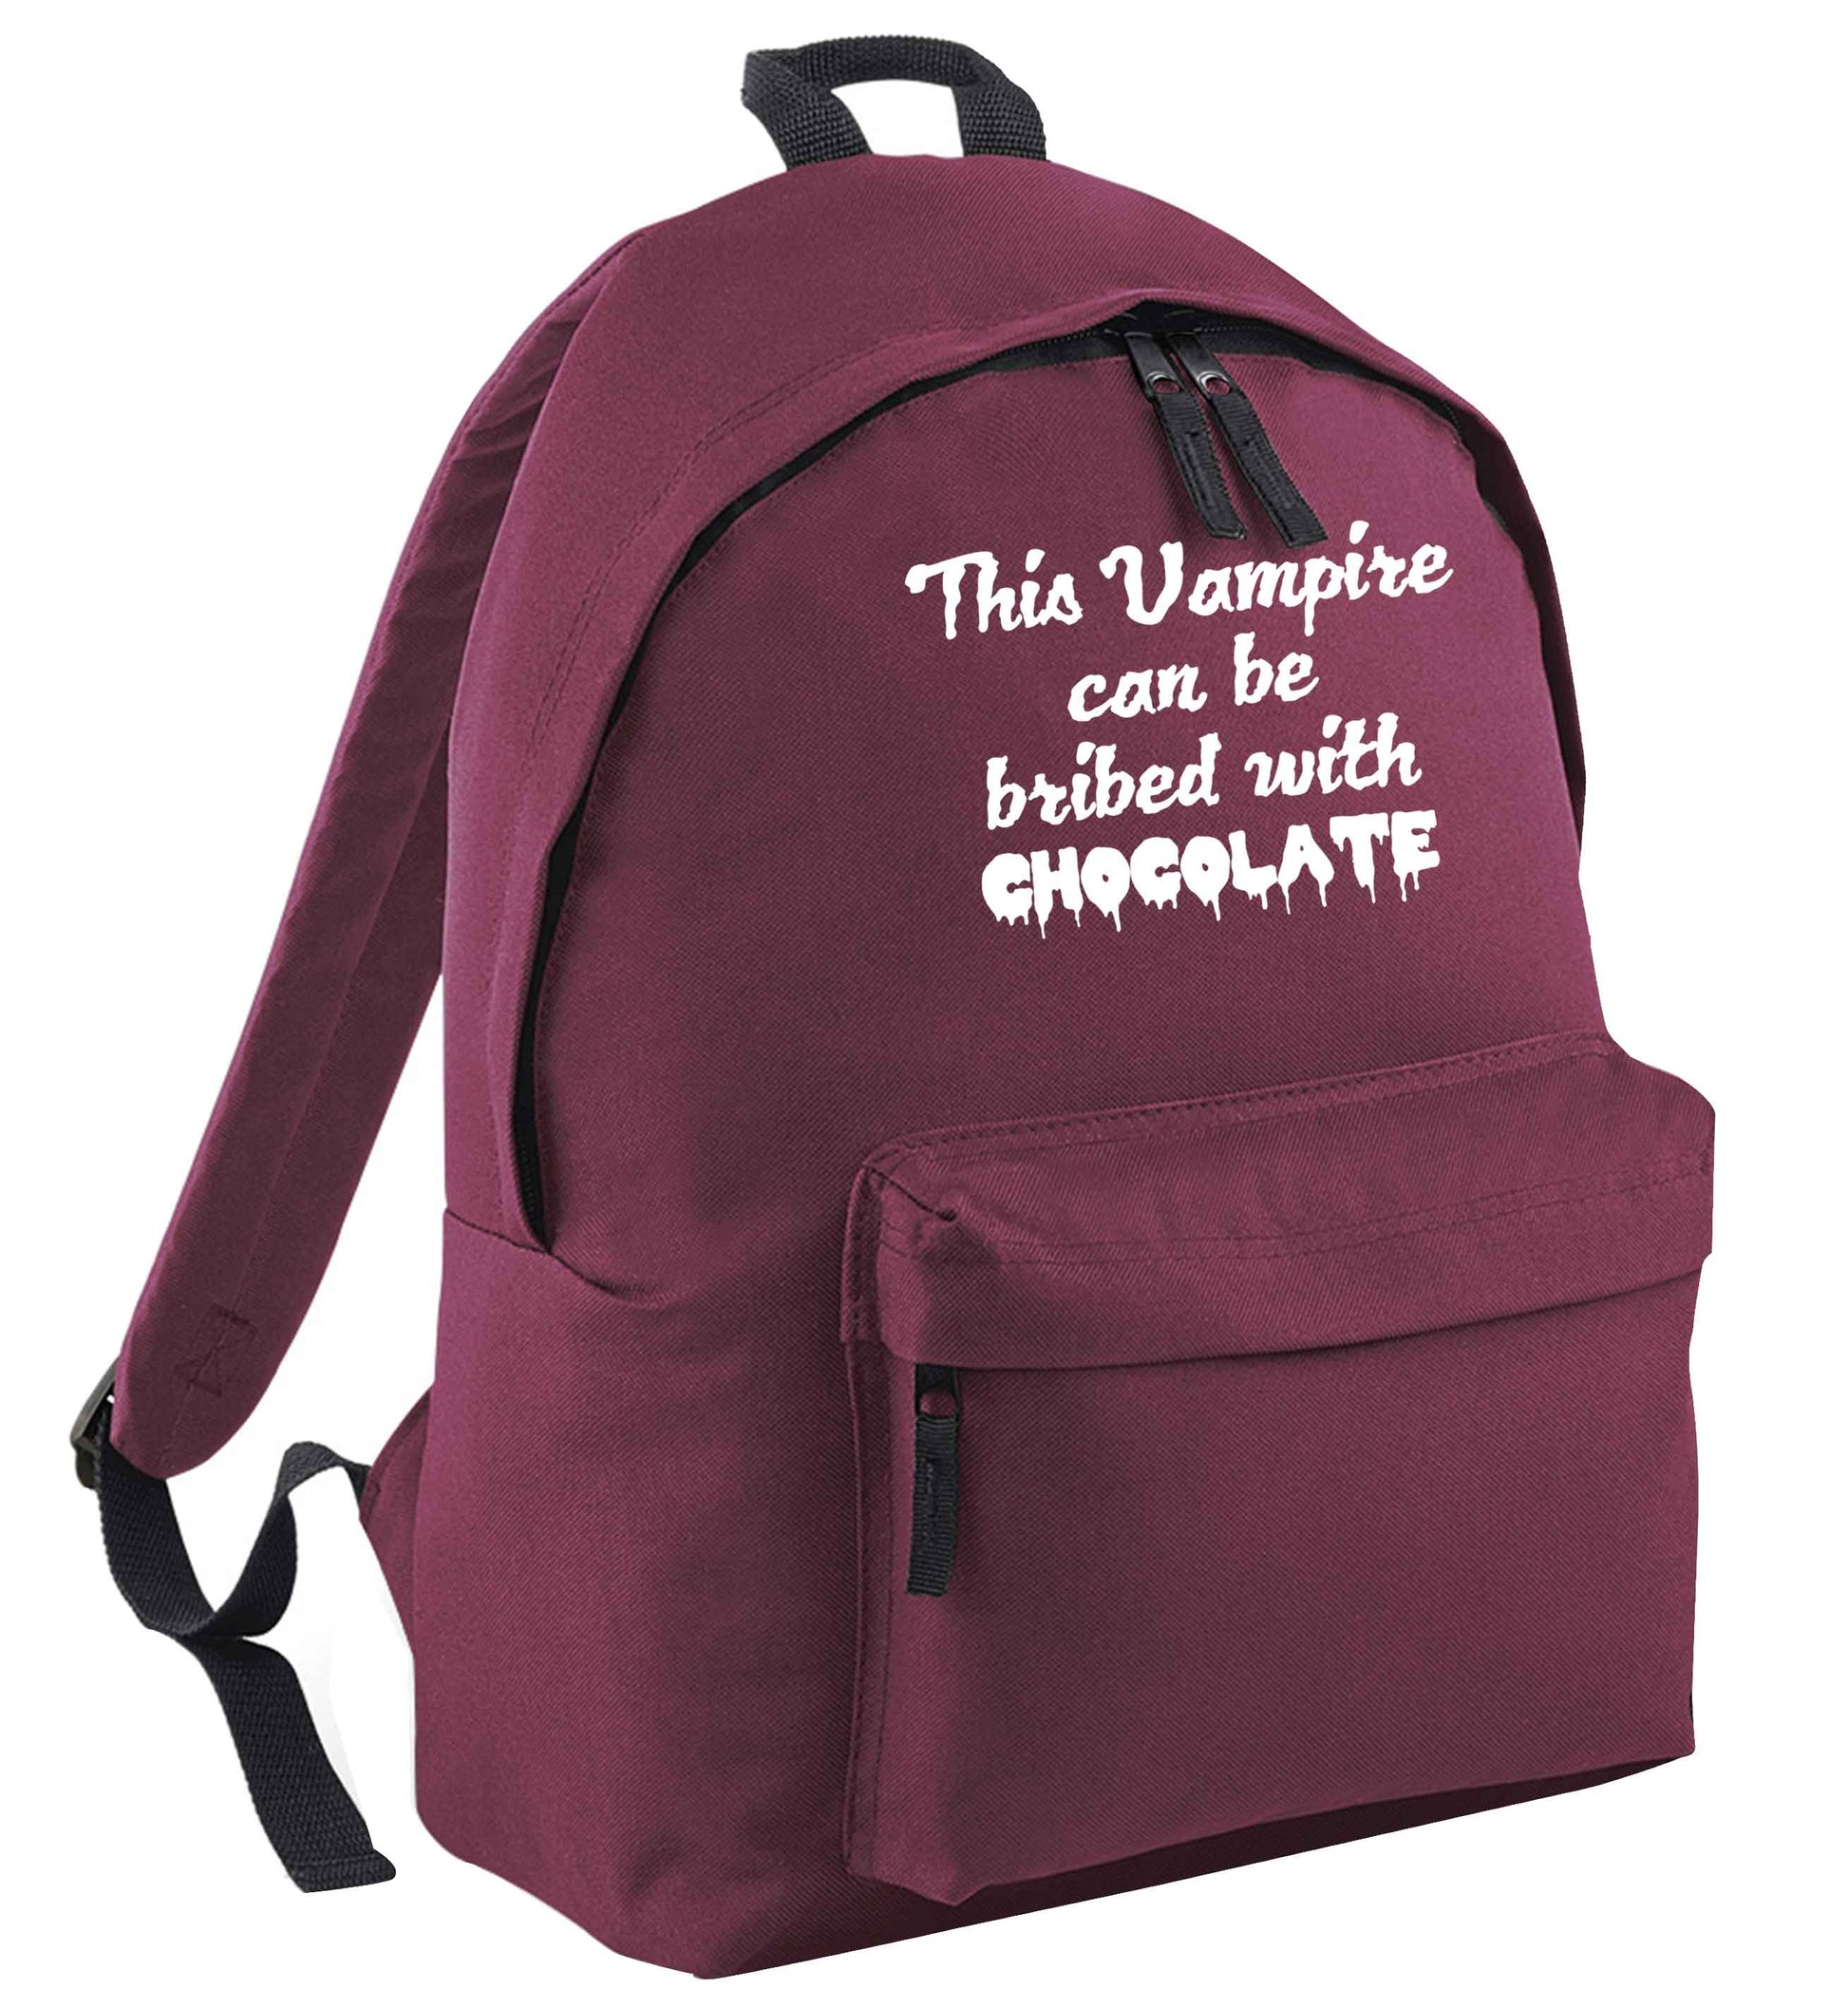 This vampire can be bribed with chocolate maroon adults backpack